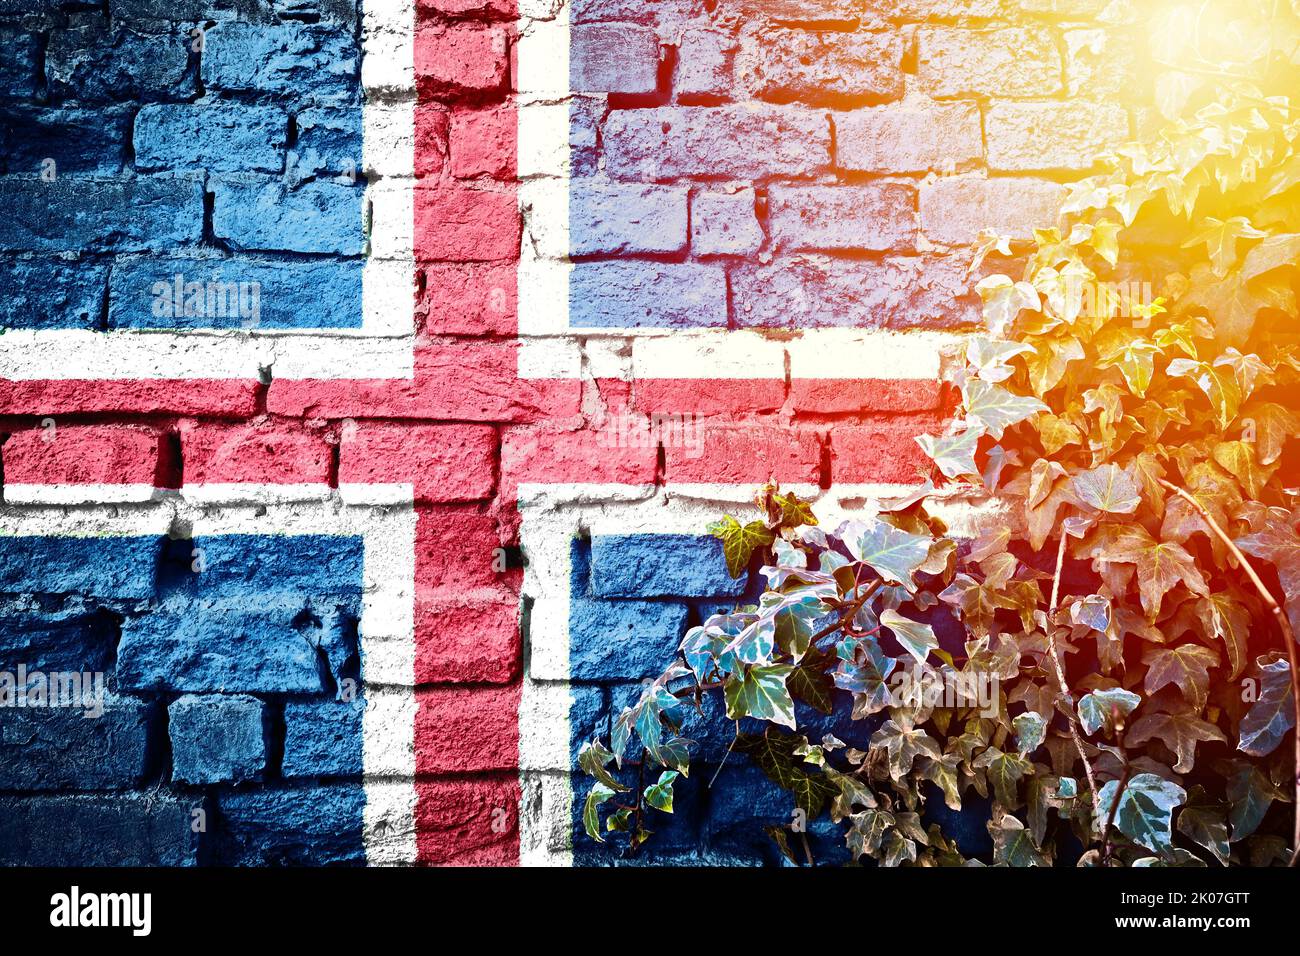 Iceland grunge flag on brick wall with ivy plant sun haze view, country symbol concept Stock Photo